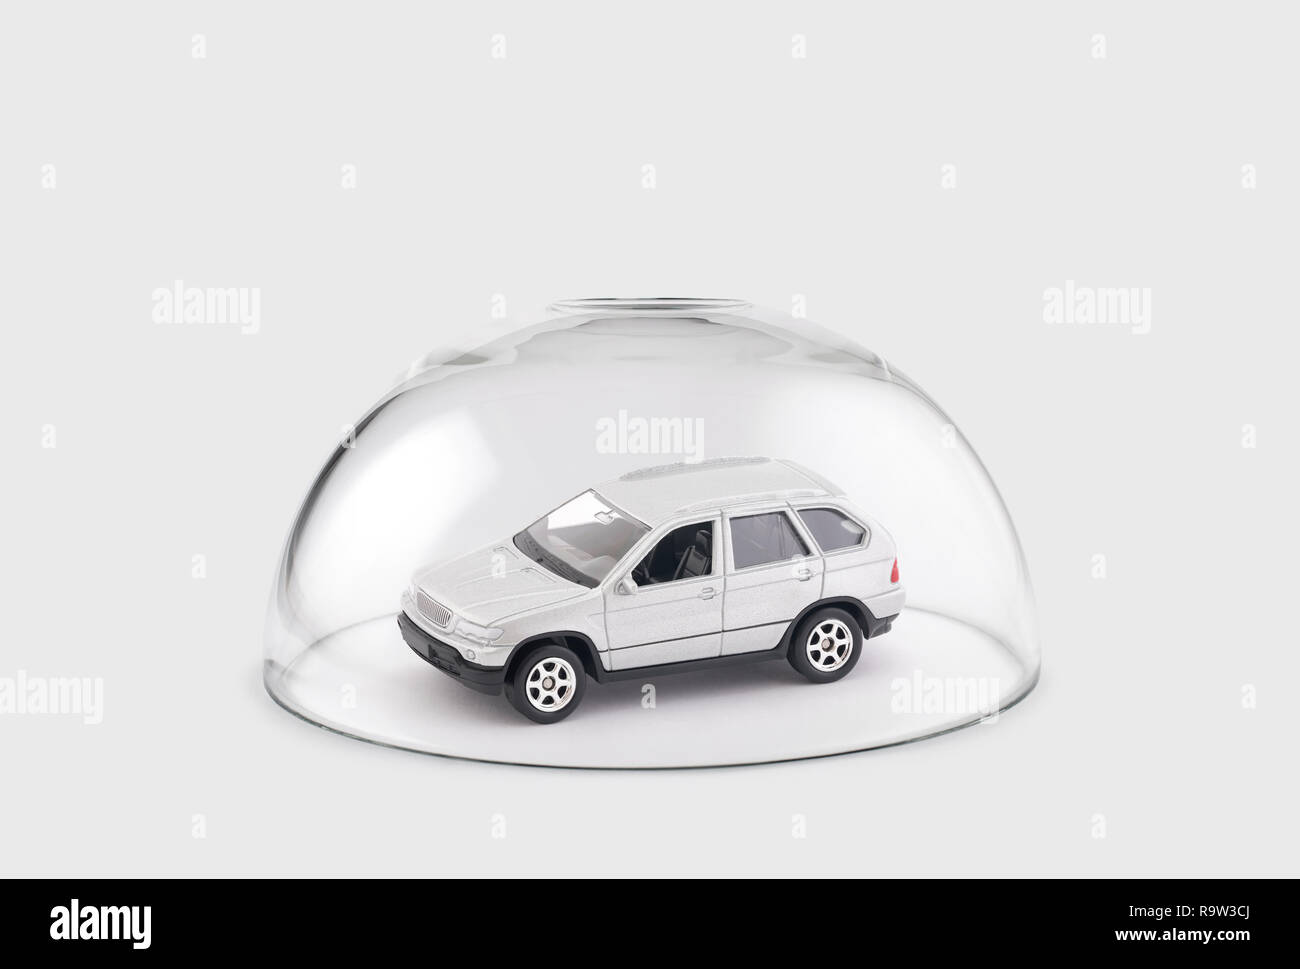 Modern silver car protected under a glass dome Stock Photo